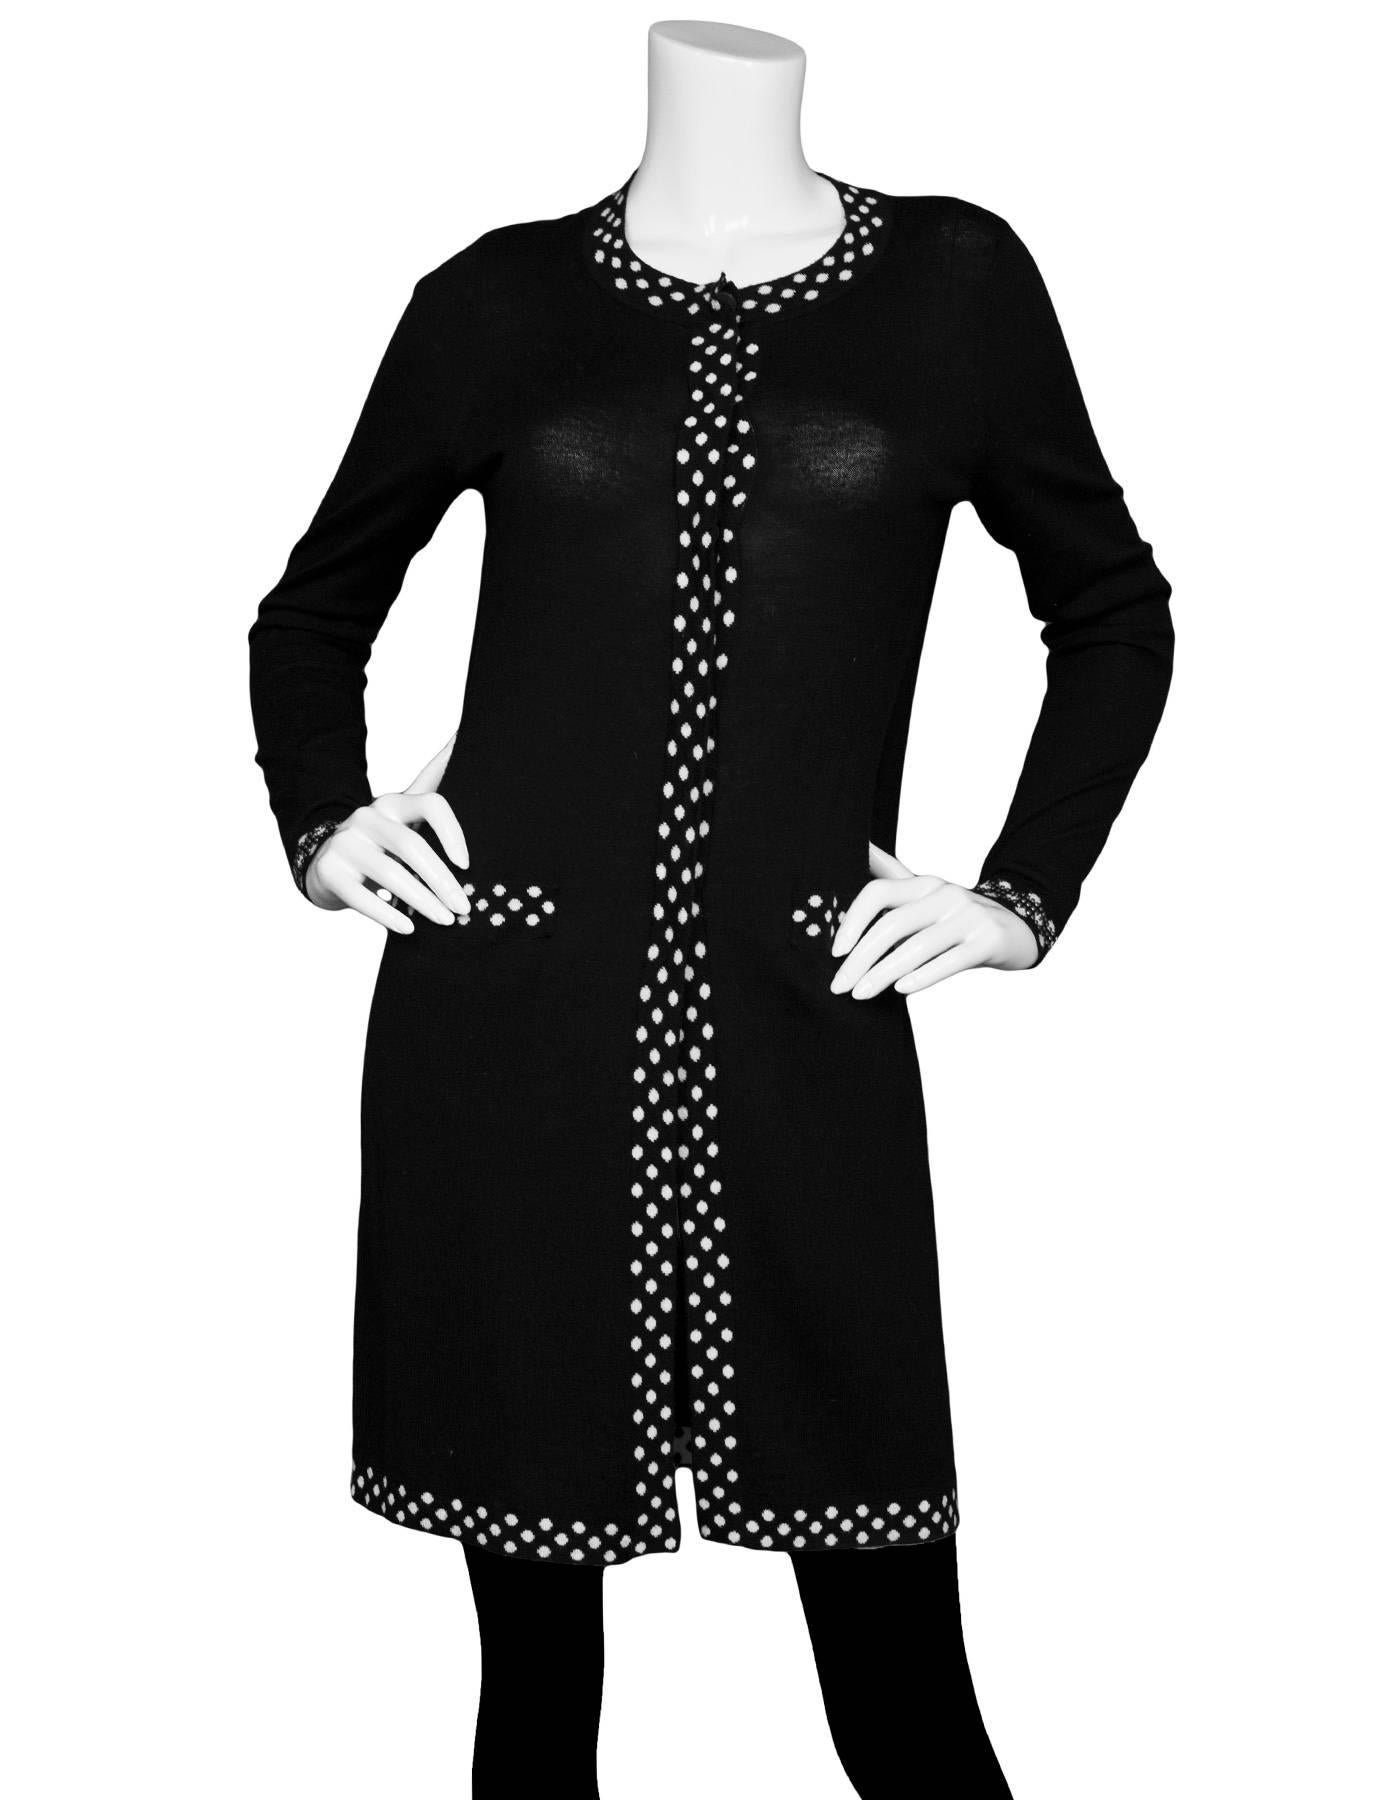 Diane von Furstenberg Black Wool Long Cardigan Sweater 
Features polka dot trim throughout and studs at ends of sleeves

Made In: China
Color: Black and white
Composition: 75% merino wool, 25% silk
Lining: None
Closure/Opening: Button down